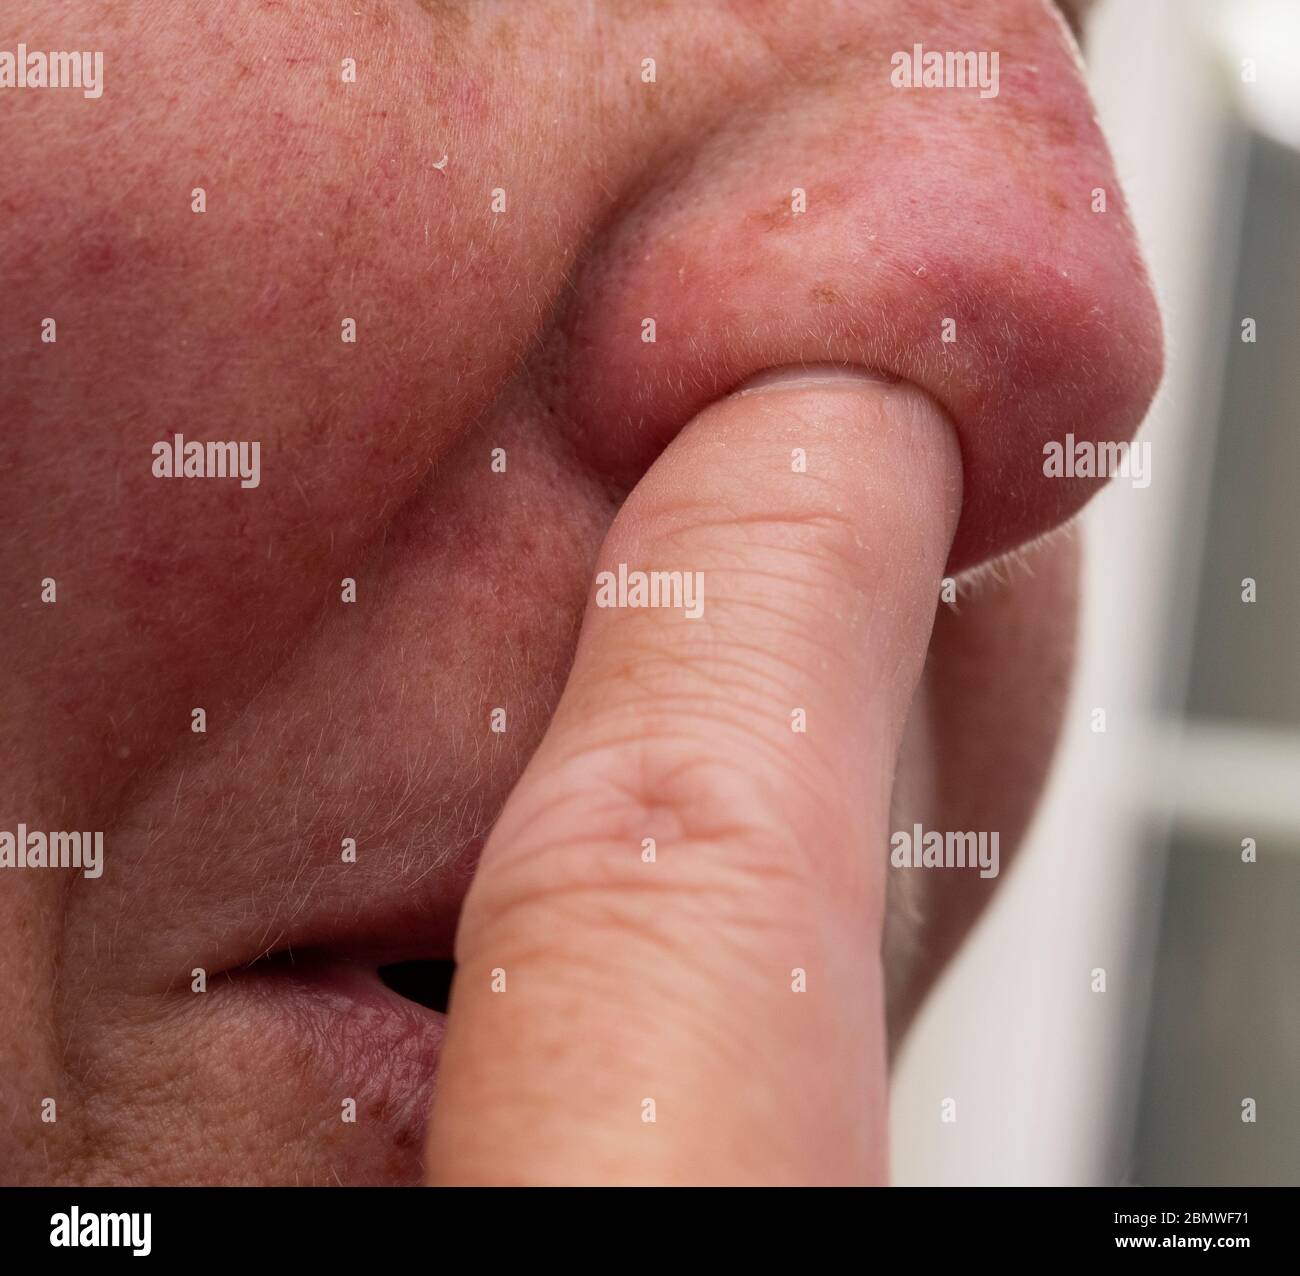 Woman with finger up her nose Stock Photo